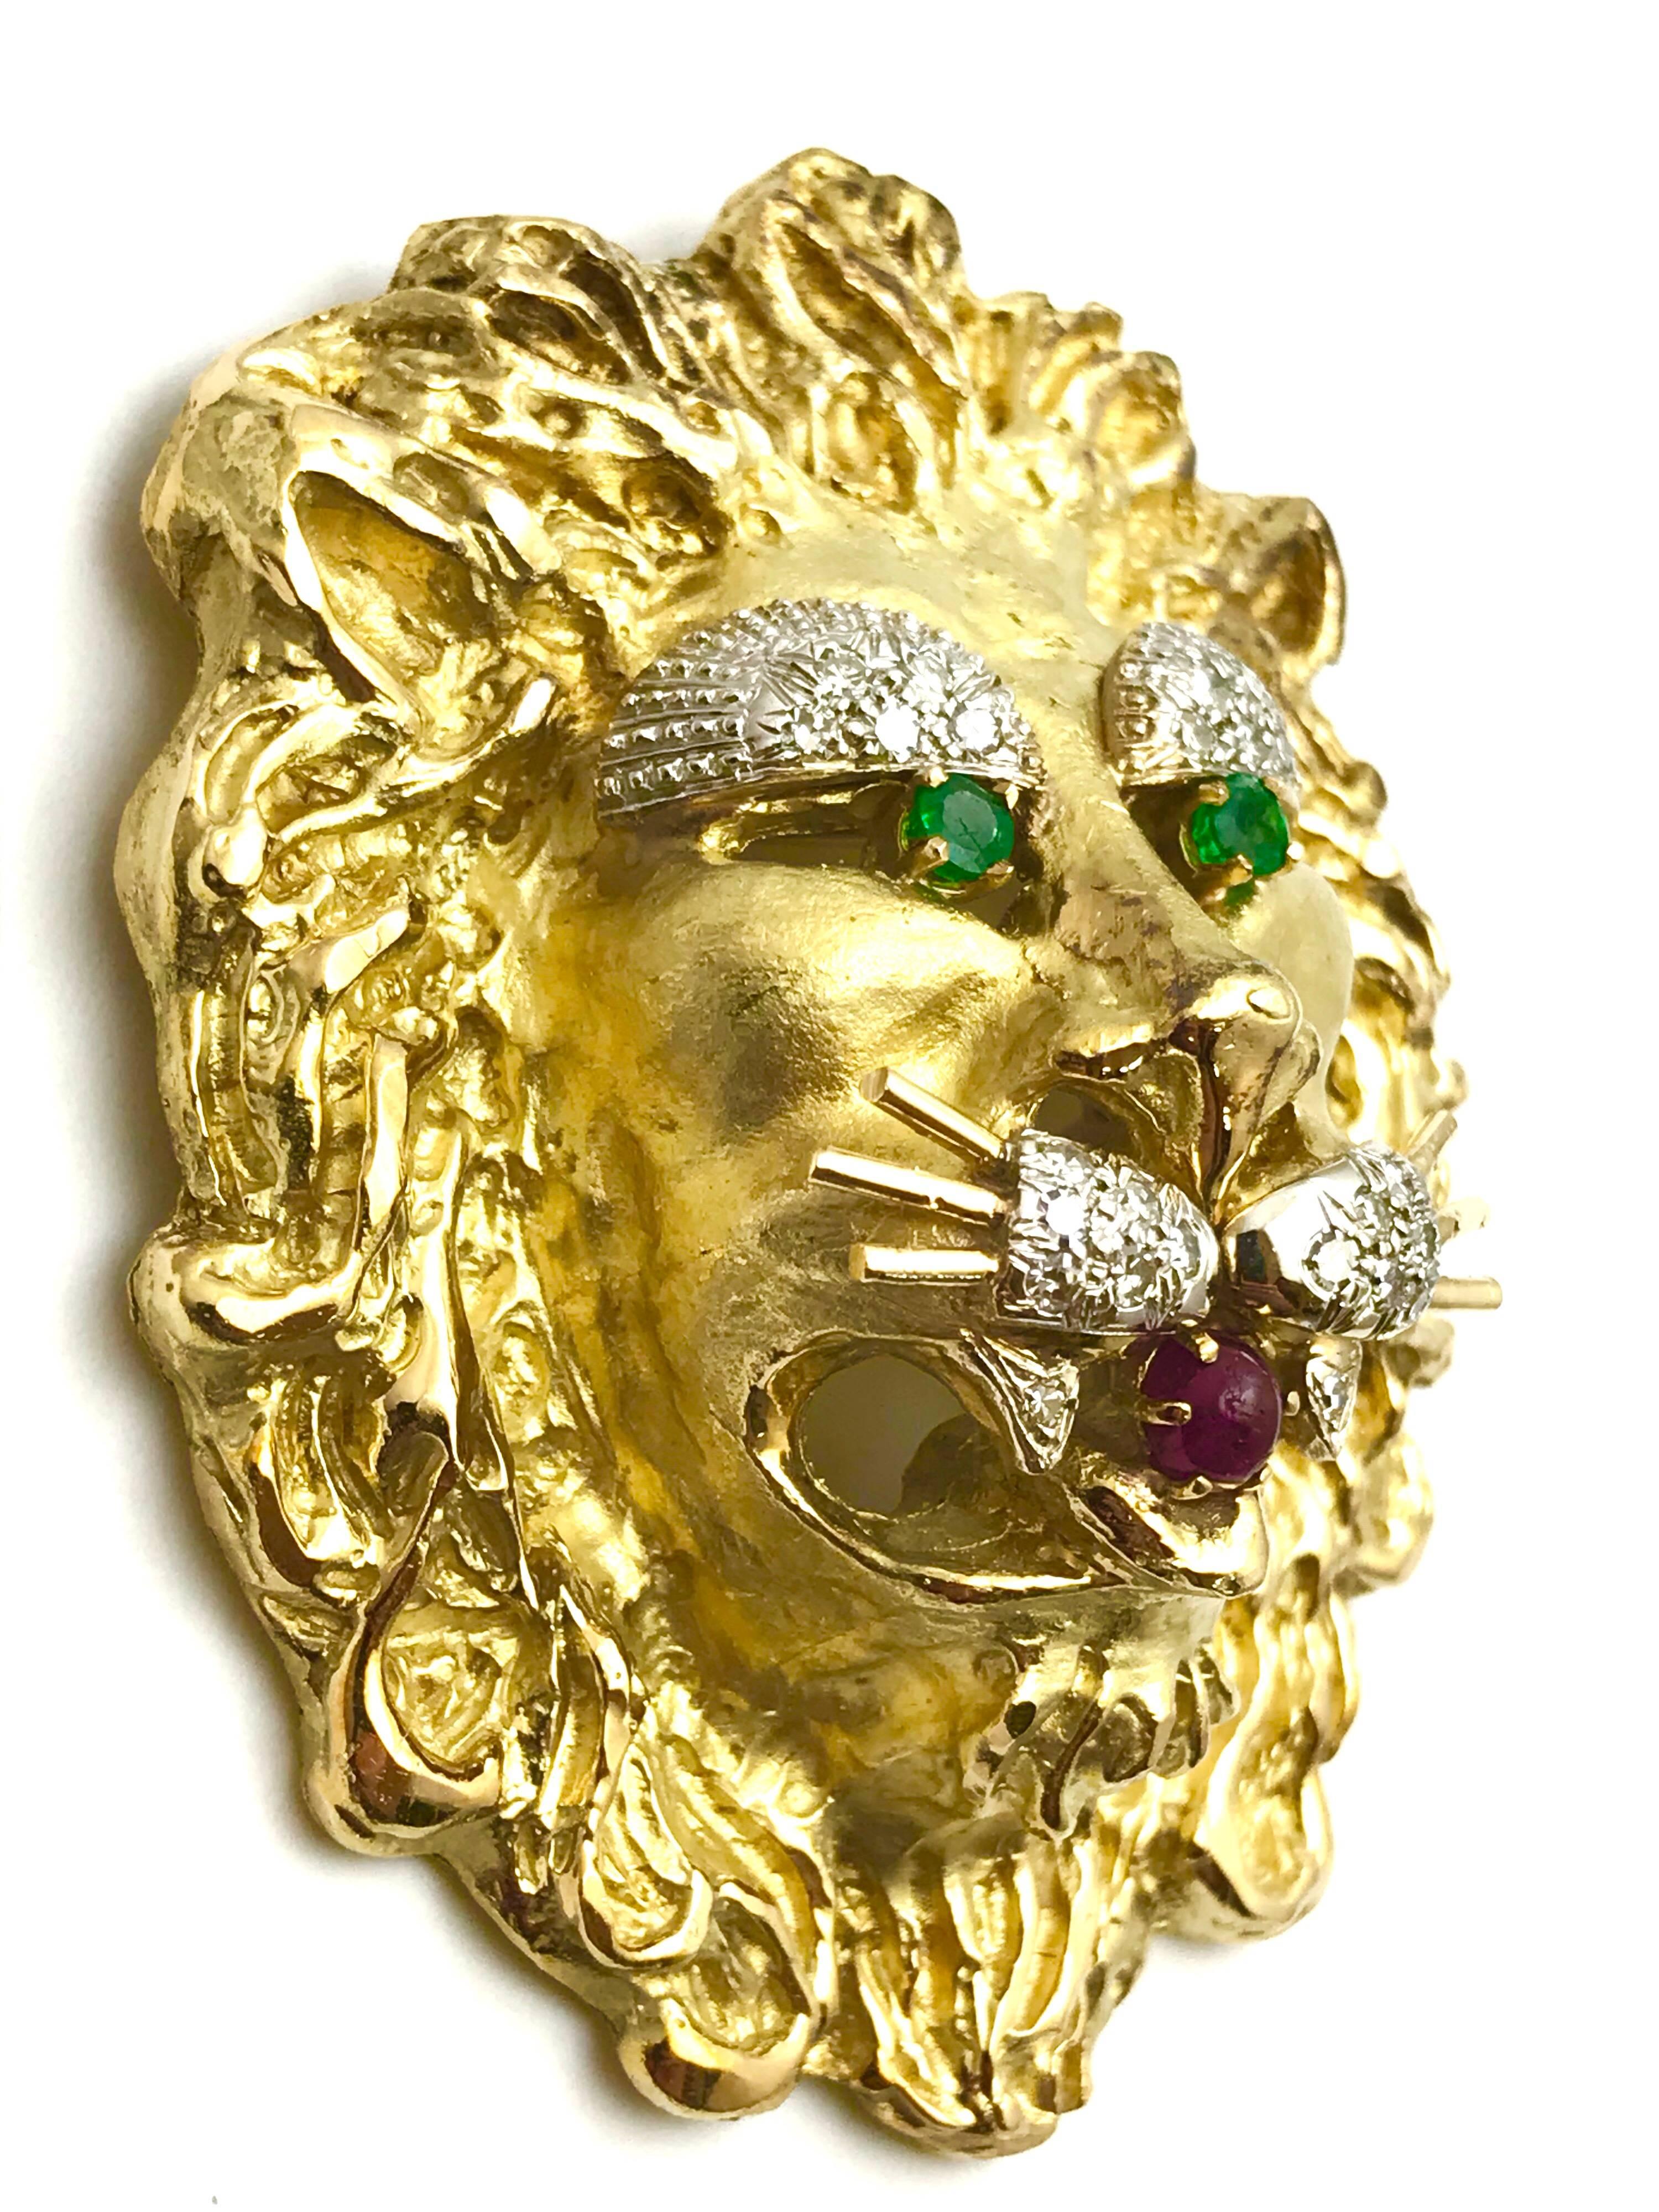 Large 18K yellow gold lion brooch pendant by Hammerman Brothers.  Set with two round cut emeralds, a round cabochon ruby and 24 single cut diamonds.  The lion measures 2 1/2